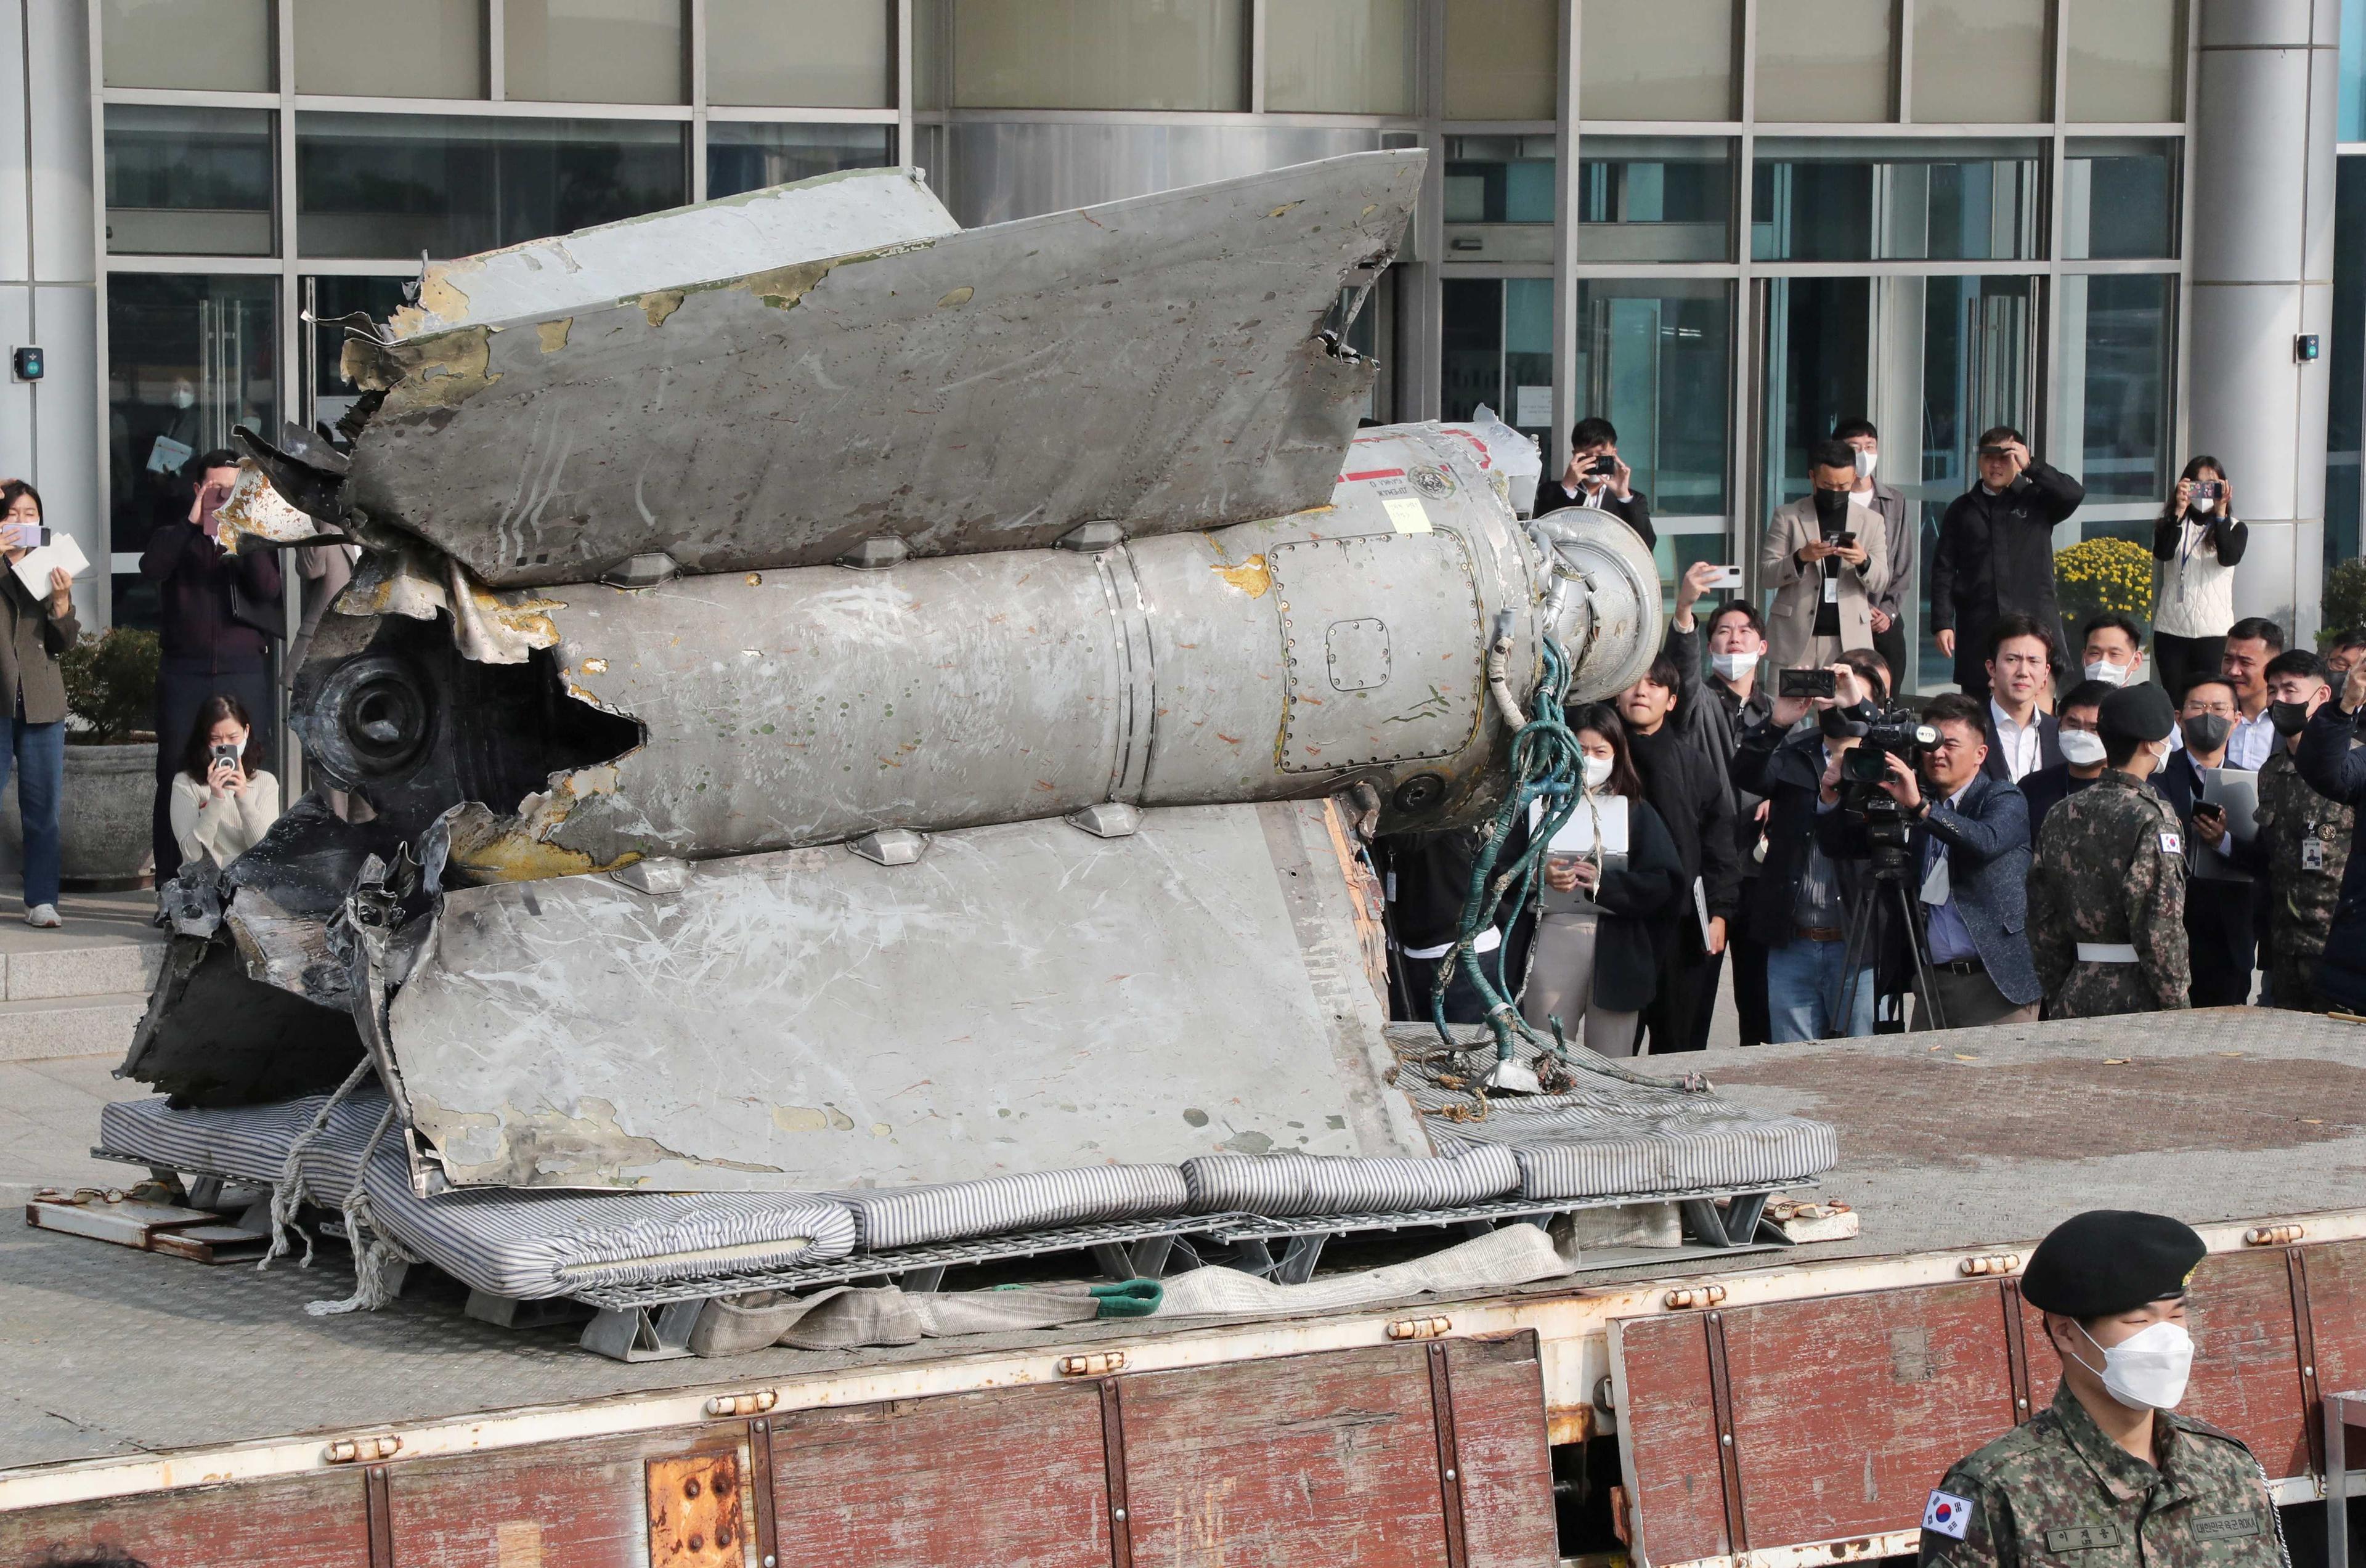 Debris of a North Korean missile salvaged from South Korean waters that was identified as parts of a Soviet-era SA-5 surface-to-air missile is seen at the Defense Ministry in Seoul, South Korea, Nov 9. Photo: Reuters